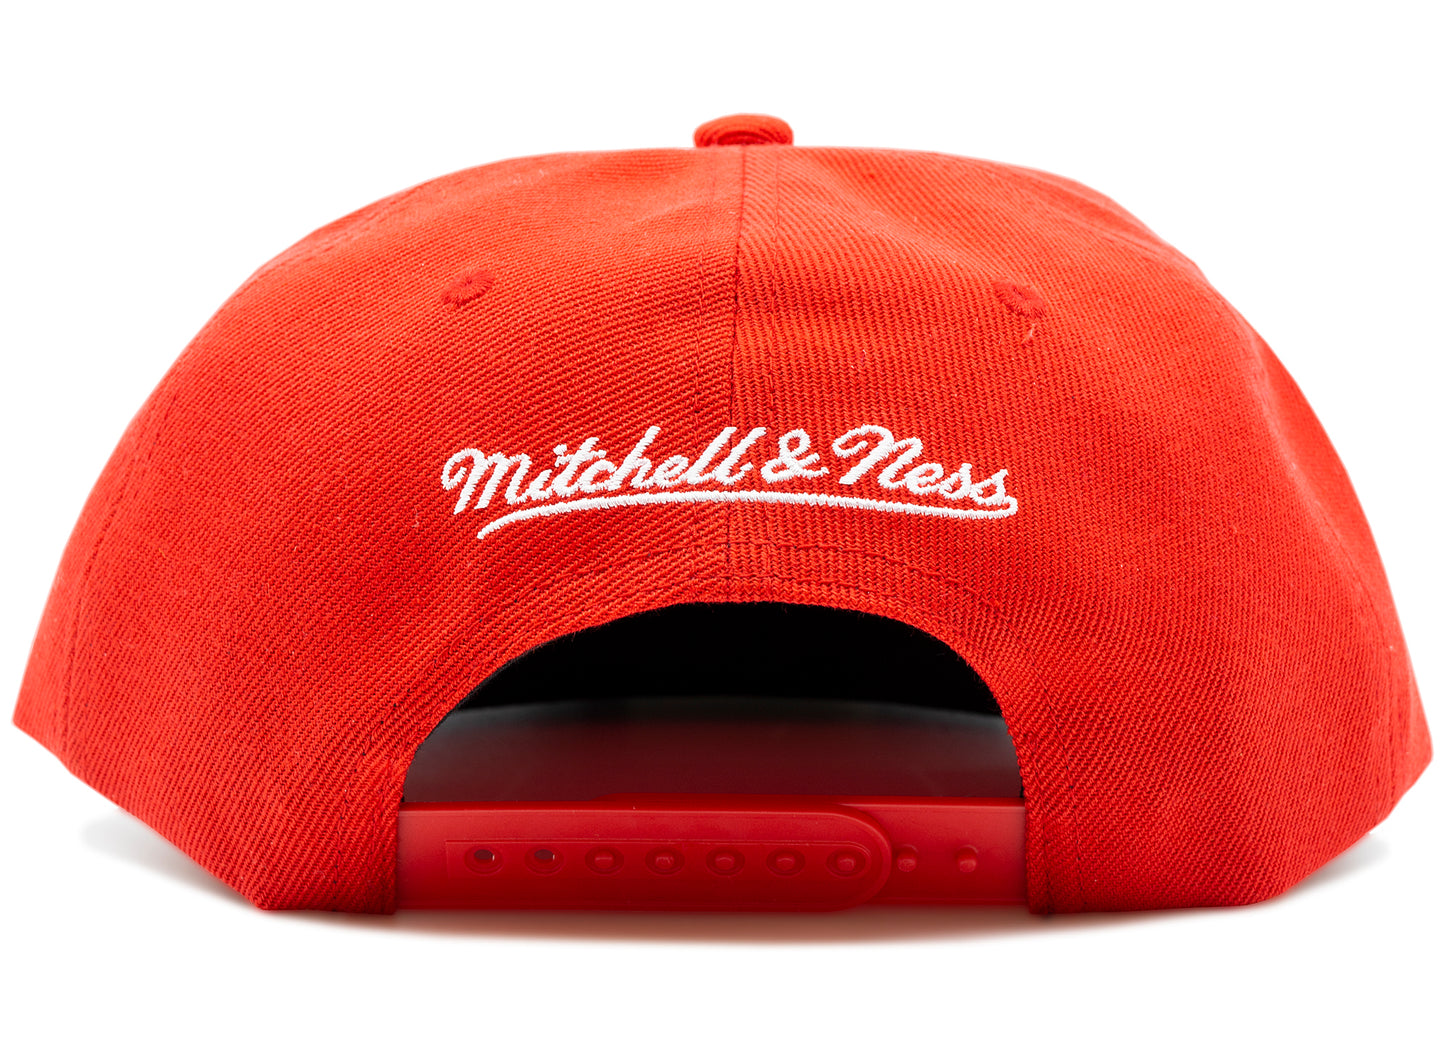 Mitchell & Ness USA Basketball Snapback Team USA in Red